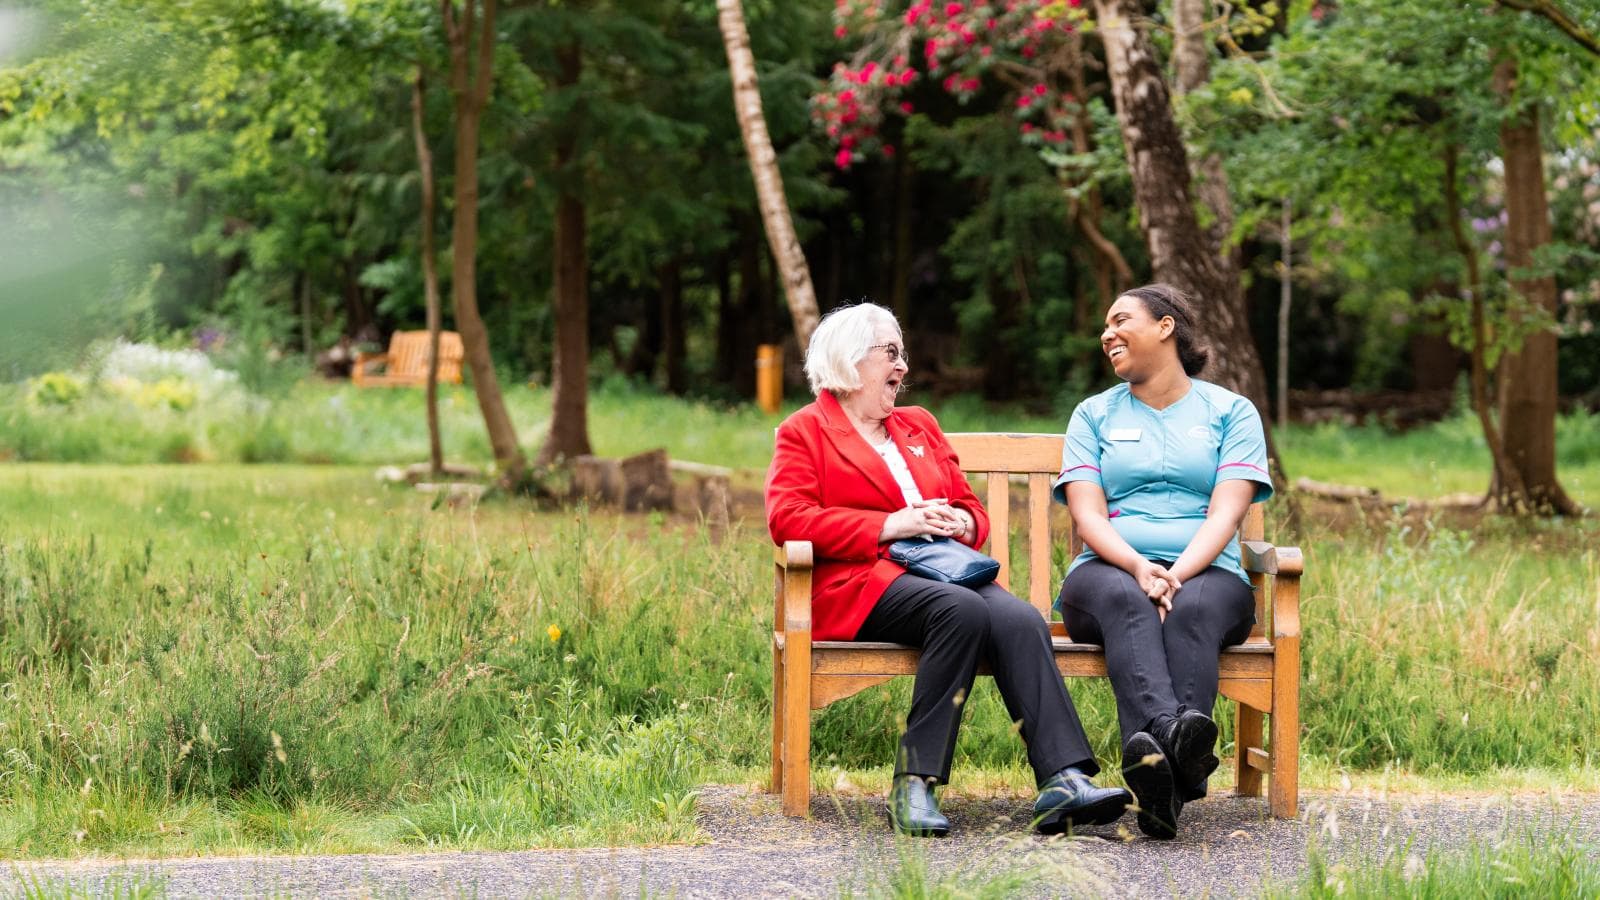 Two women sat on a garden bench, one is a female care assistant and the other is an older lady wearing a red jacket